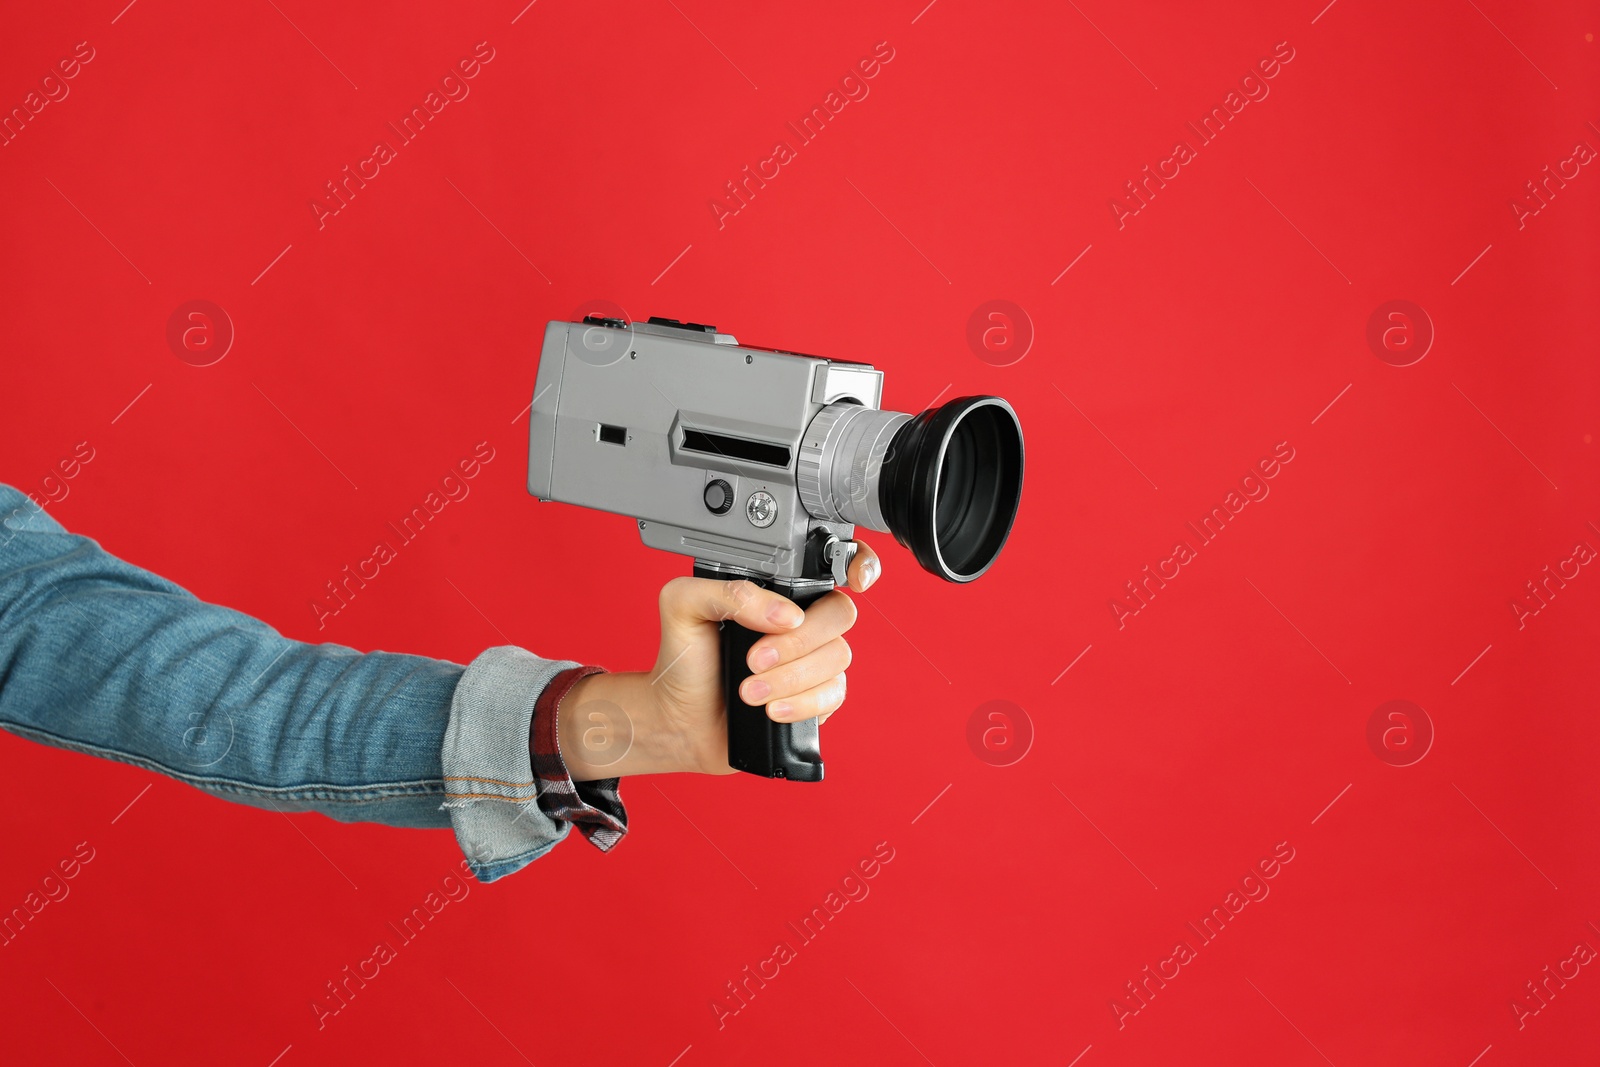 Photo of Woman with vintage video camera on red background, closeup of hand